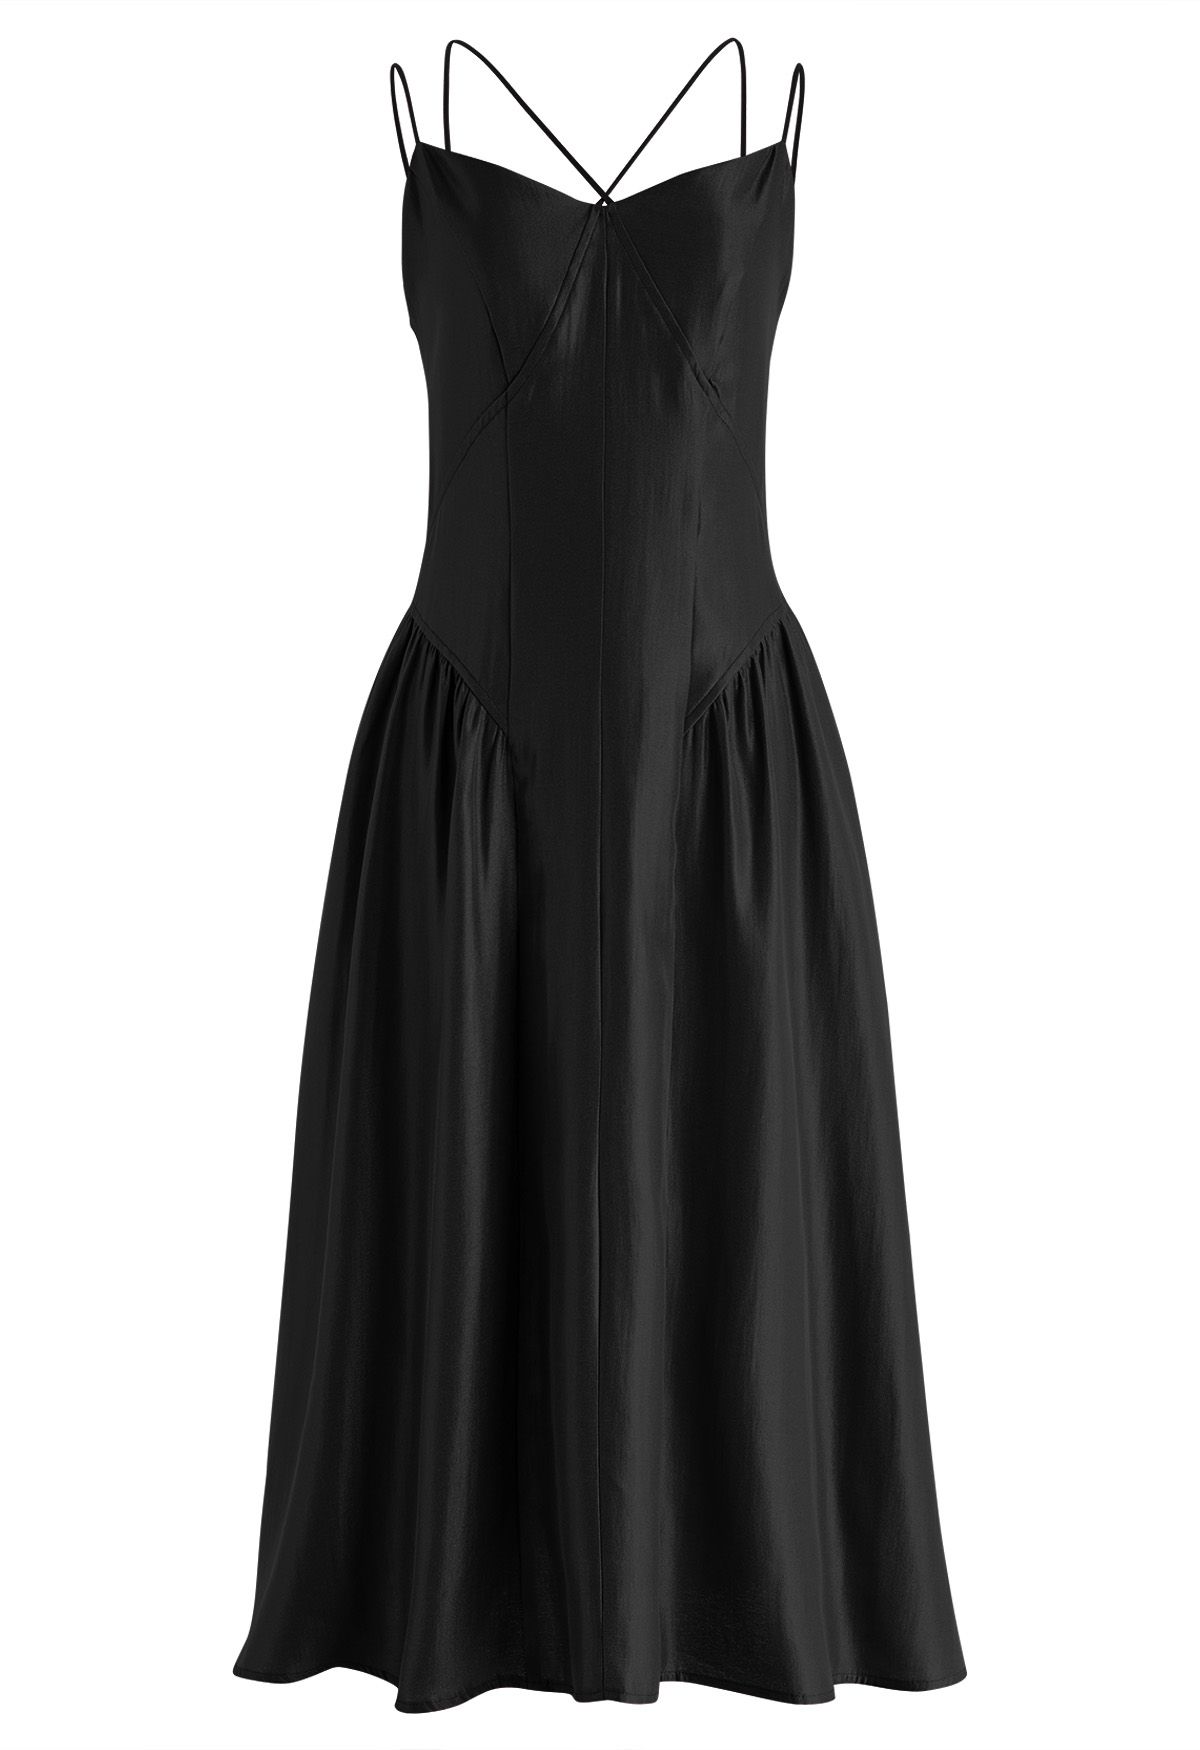 Glossy Double Strings Cami Dress in Black